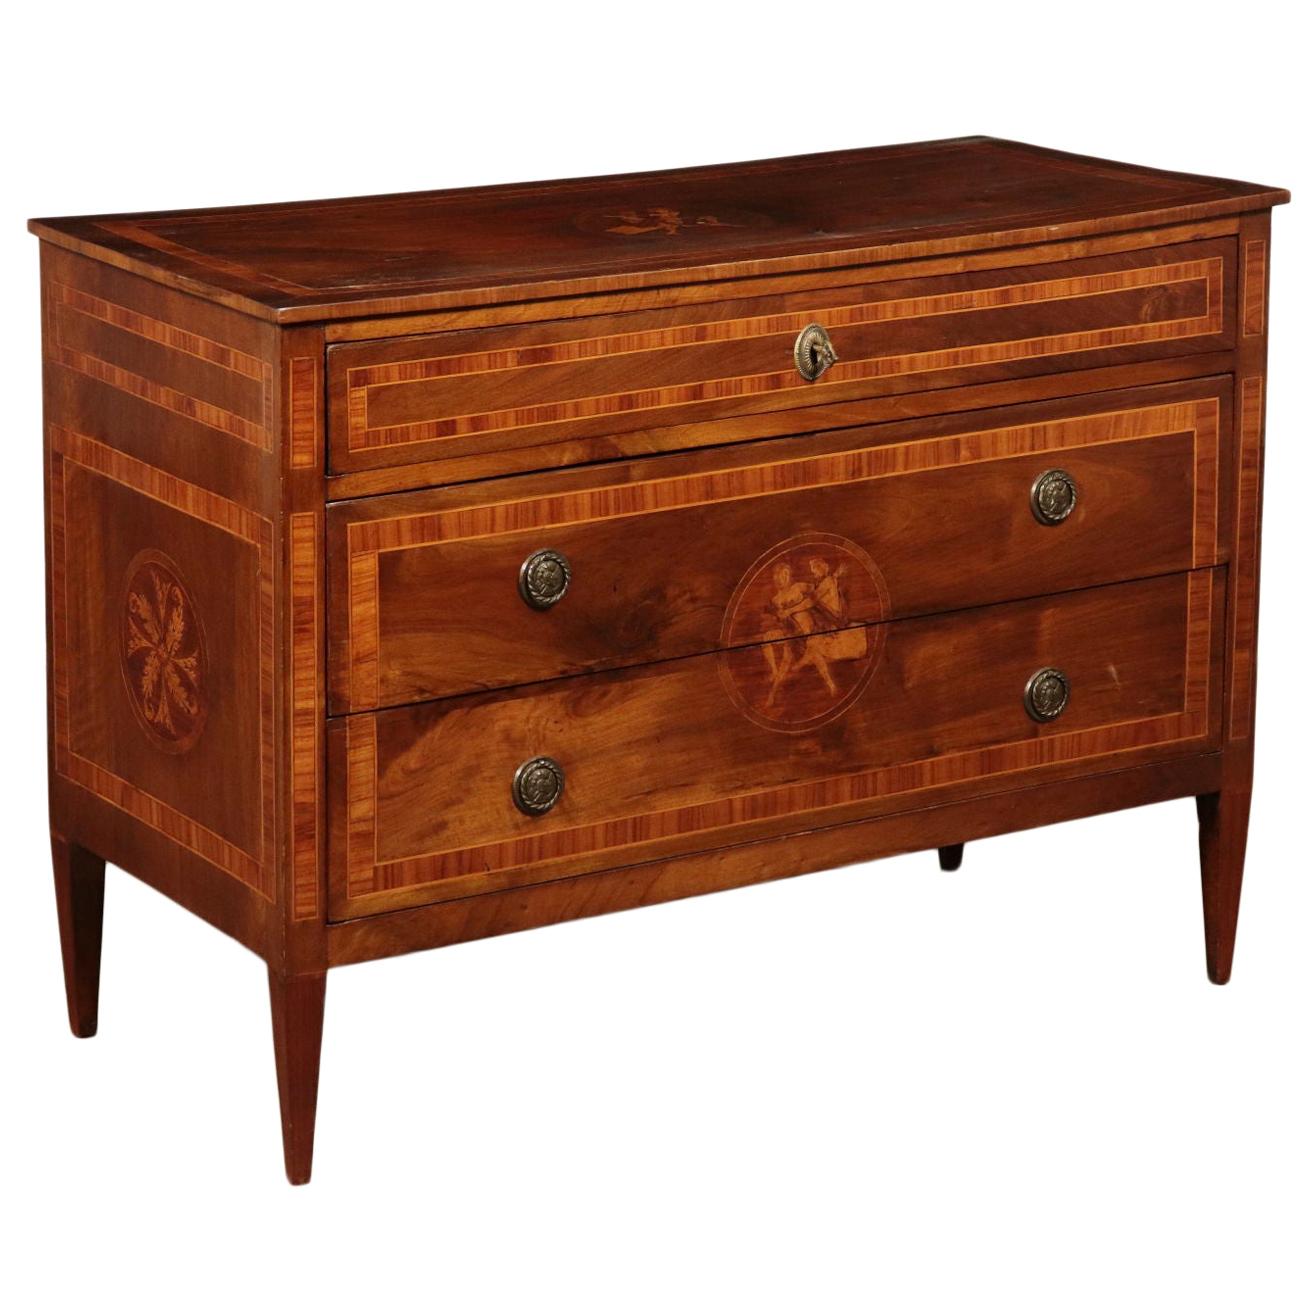 Inlaid Chest of Drawers, Walnut, Italy, 18th-19th Century